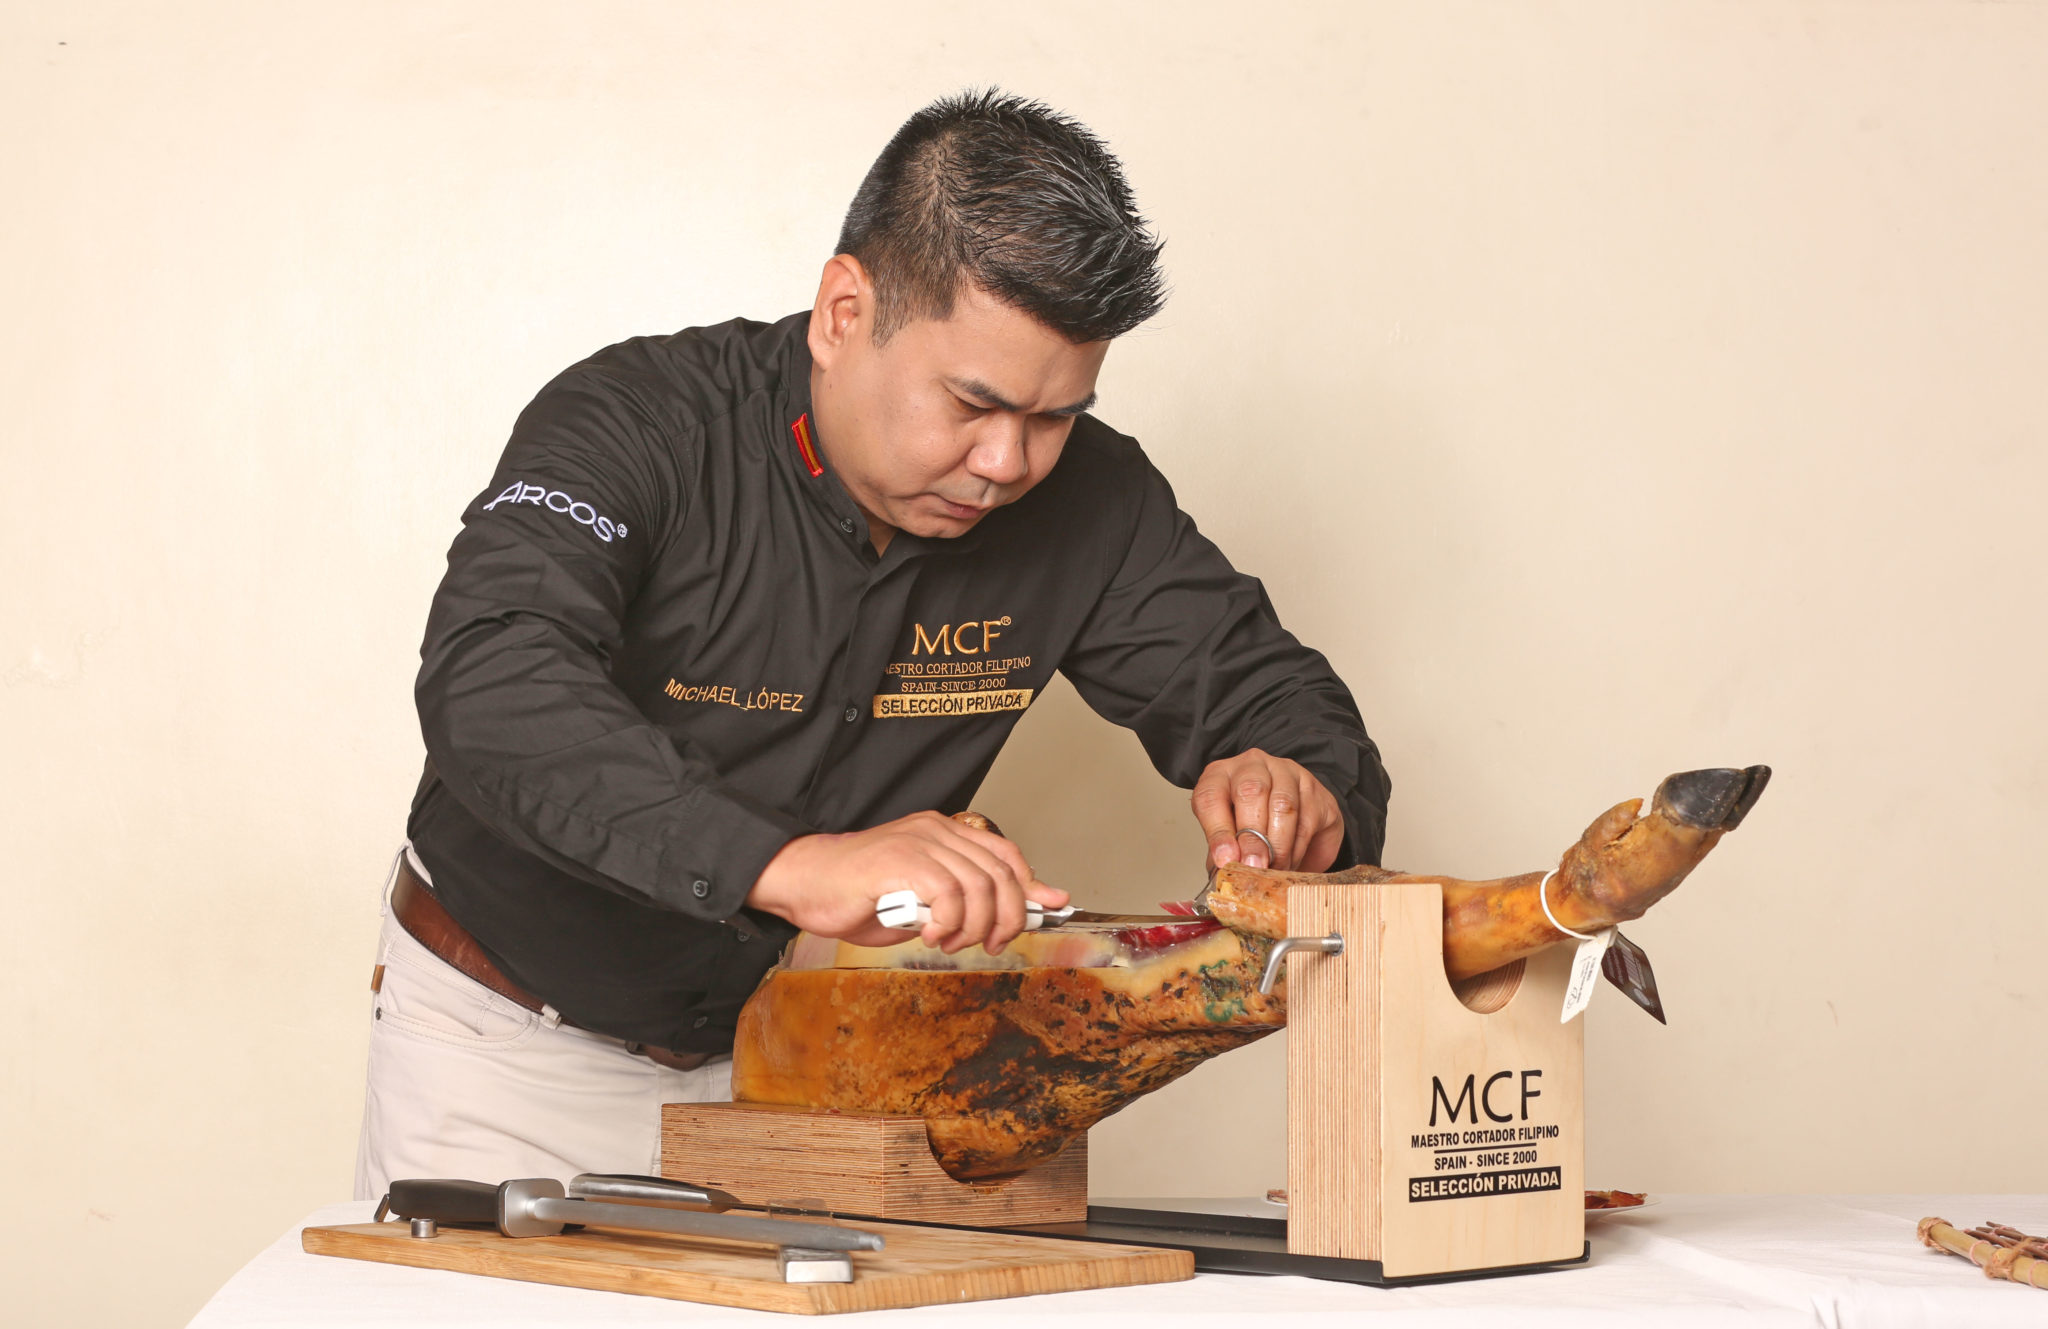 Michael and Mark Lopez carved a niche for themselves in Spain then ended up carving jamón for celebrities and chefs around the world